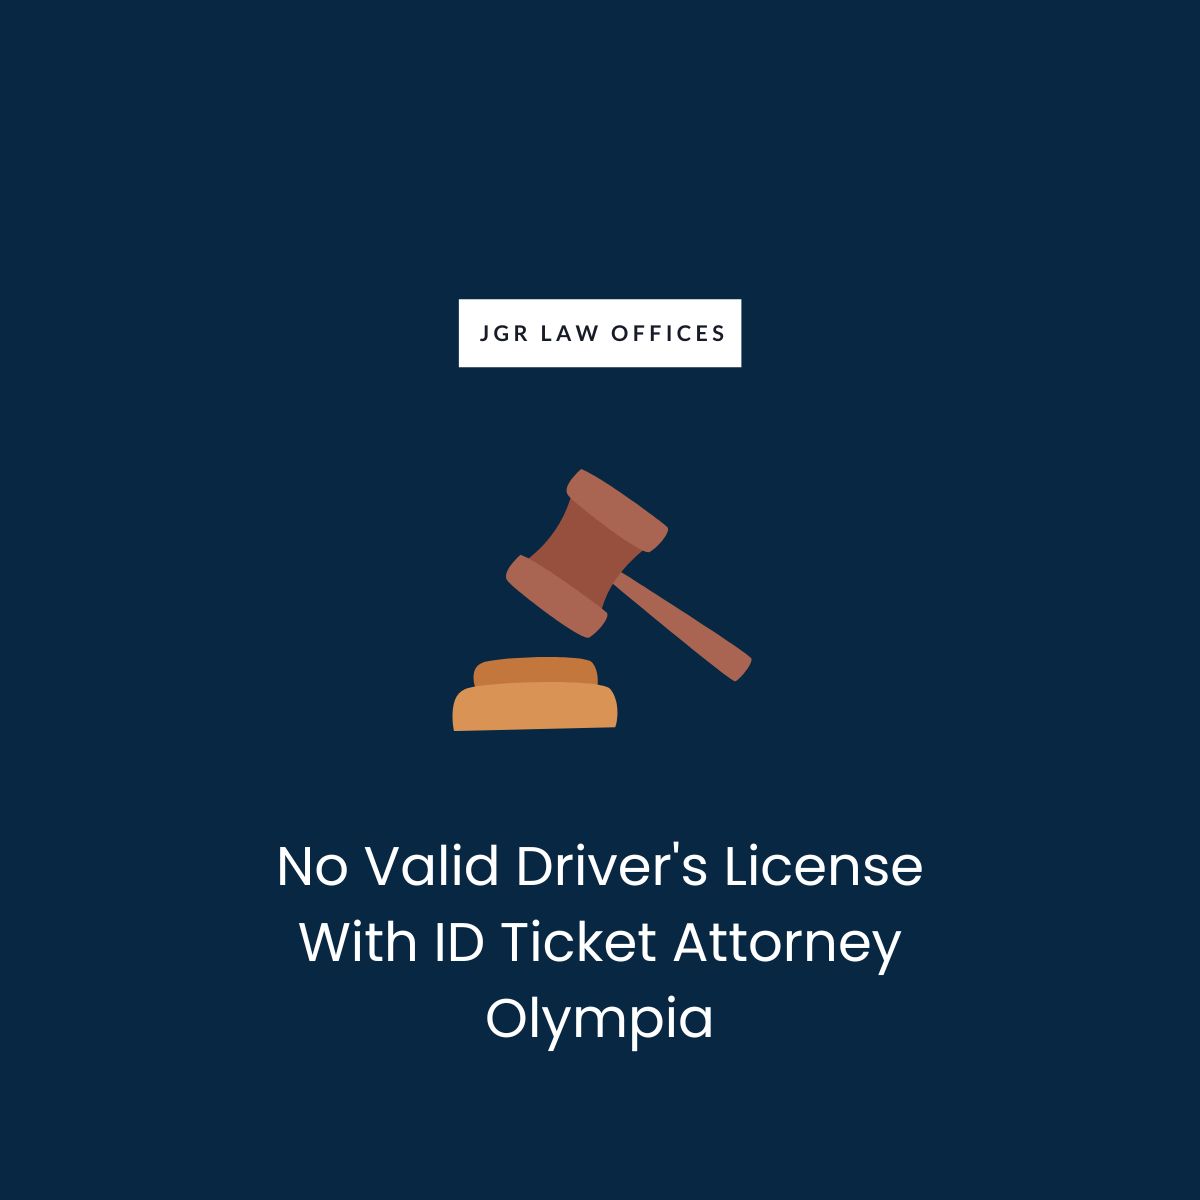 No Valid Driver's License With ID Ticket Attorney Olympia